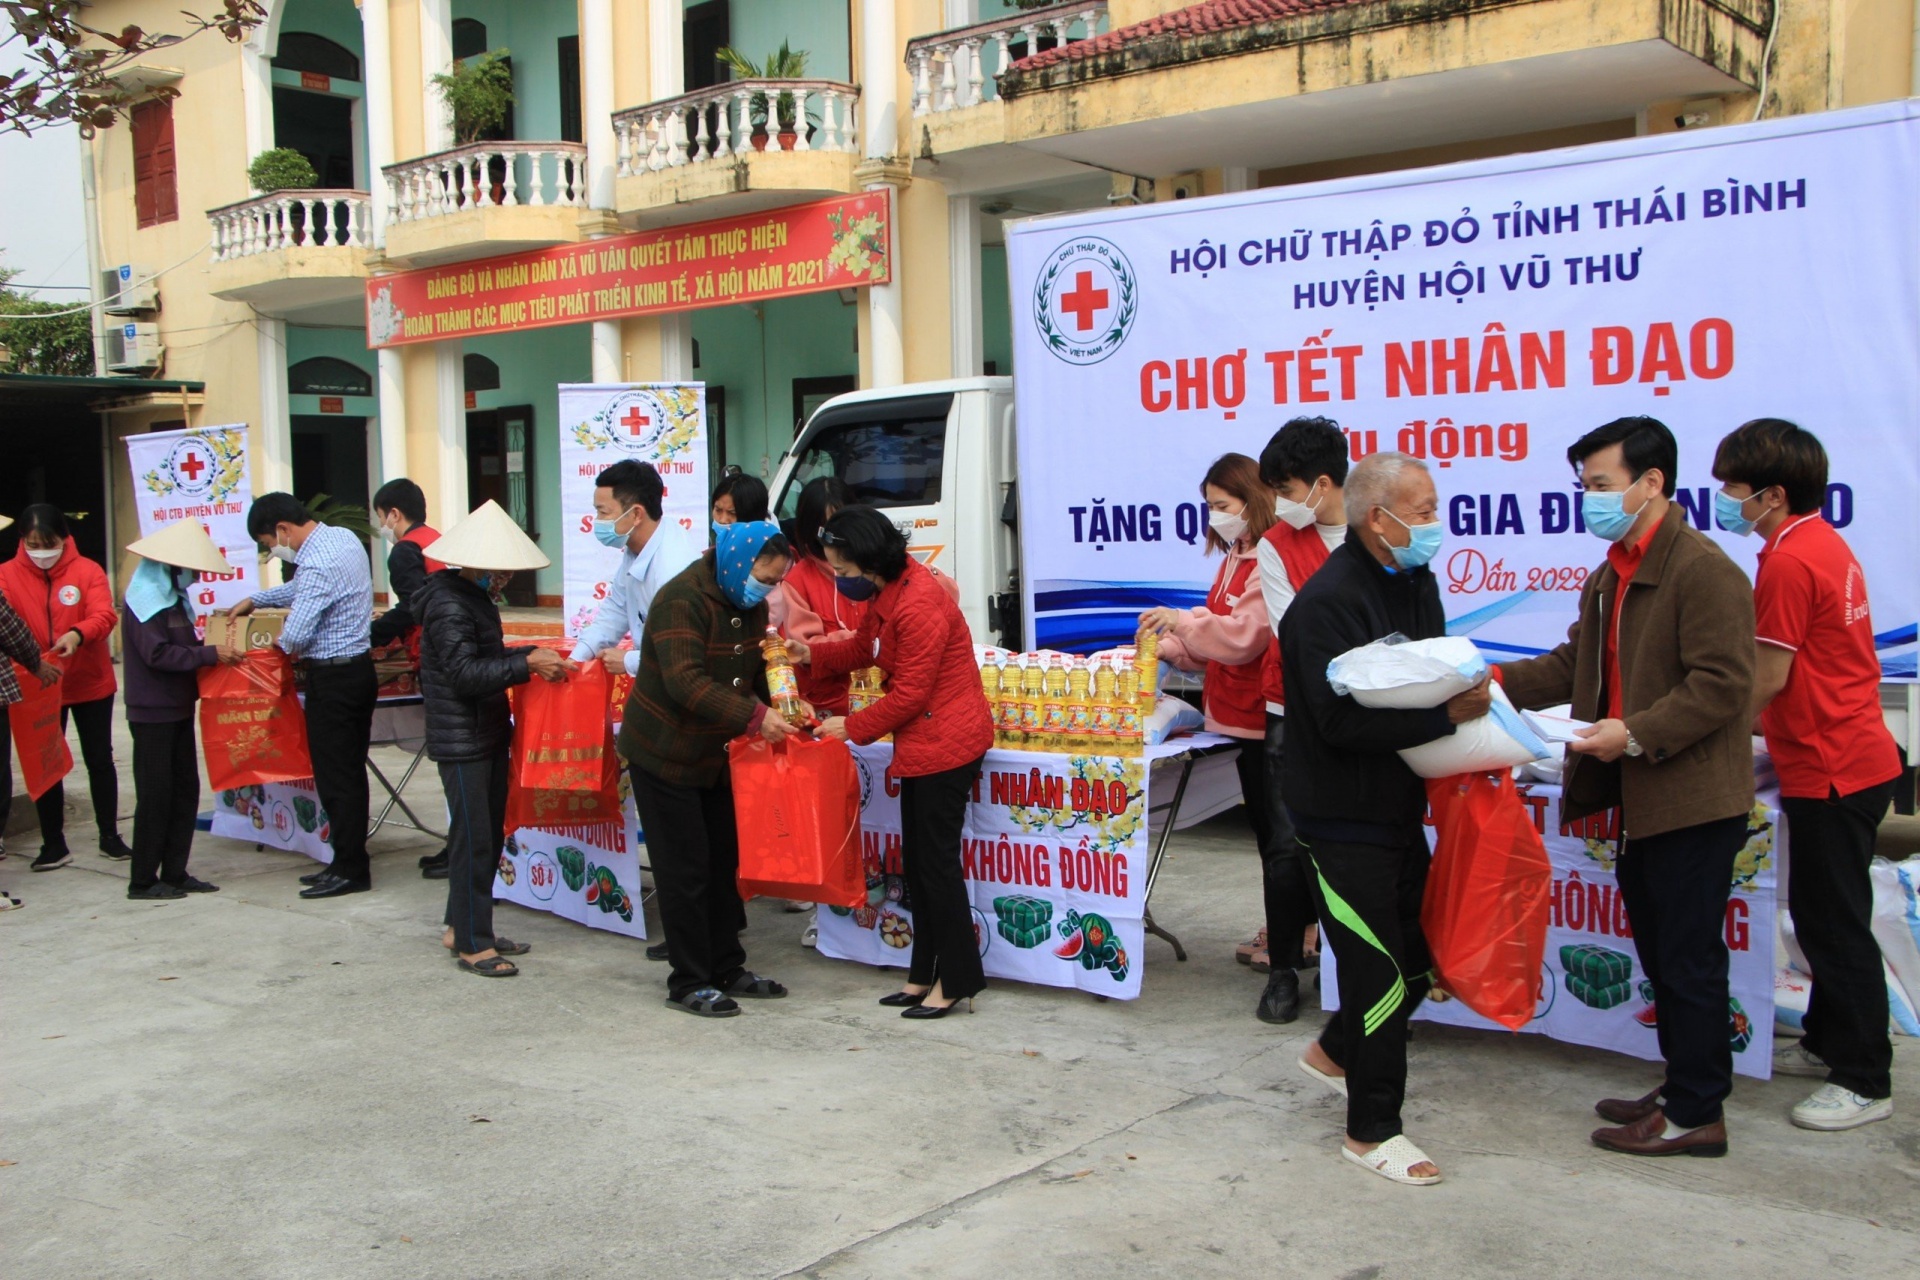 Int'l Red Cross to hold 11th Asia-Pacific Regional Conference in Hanoi